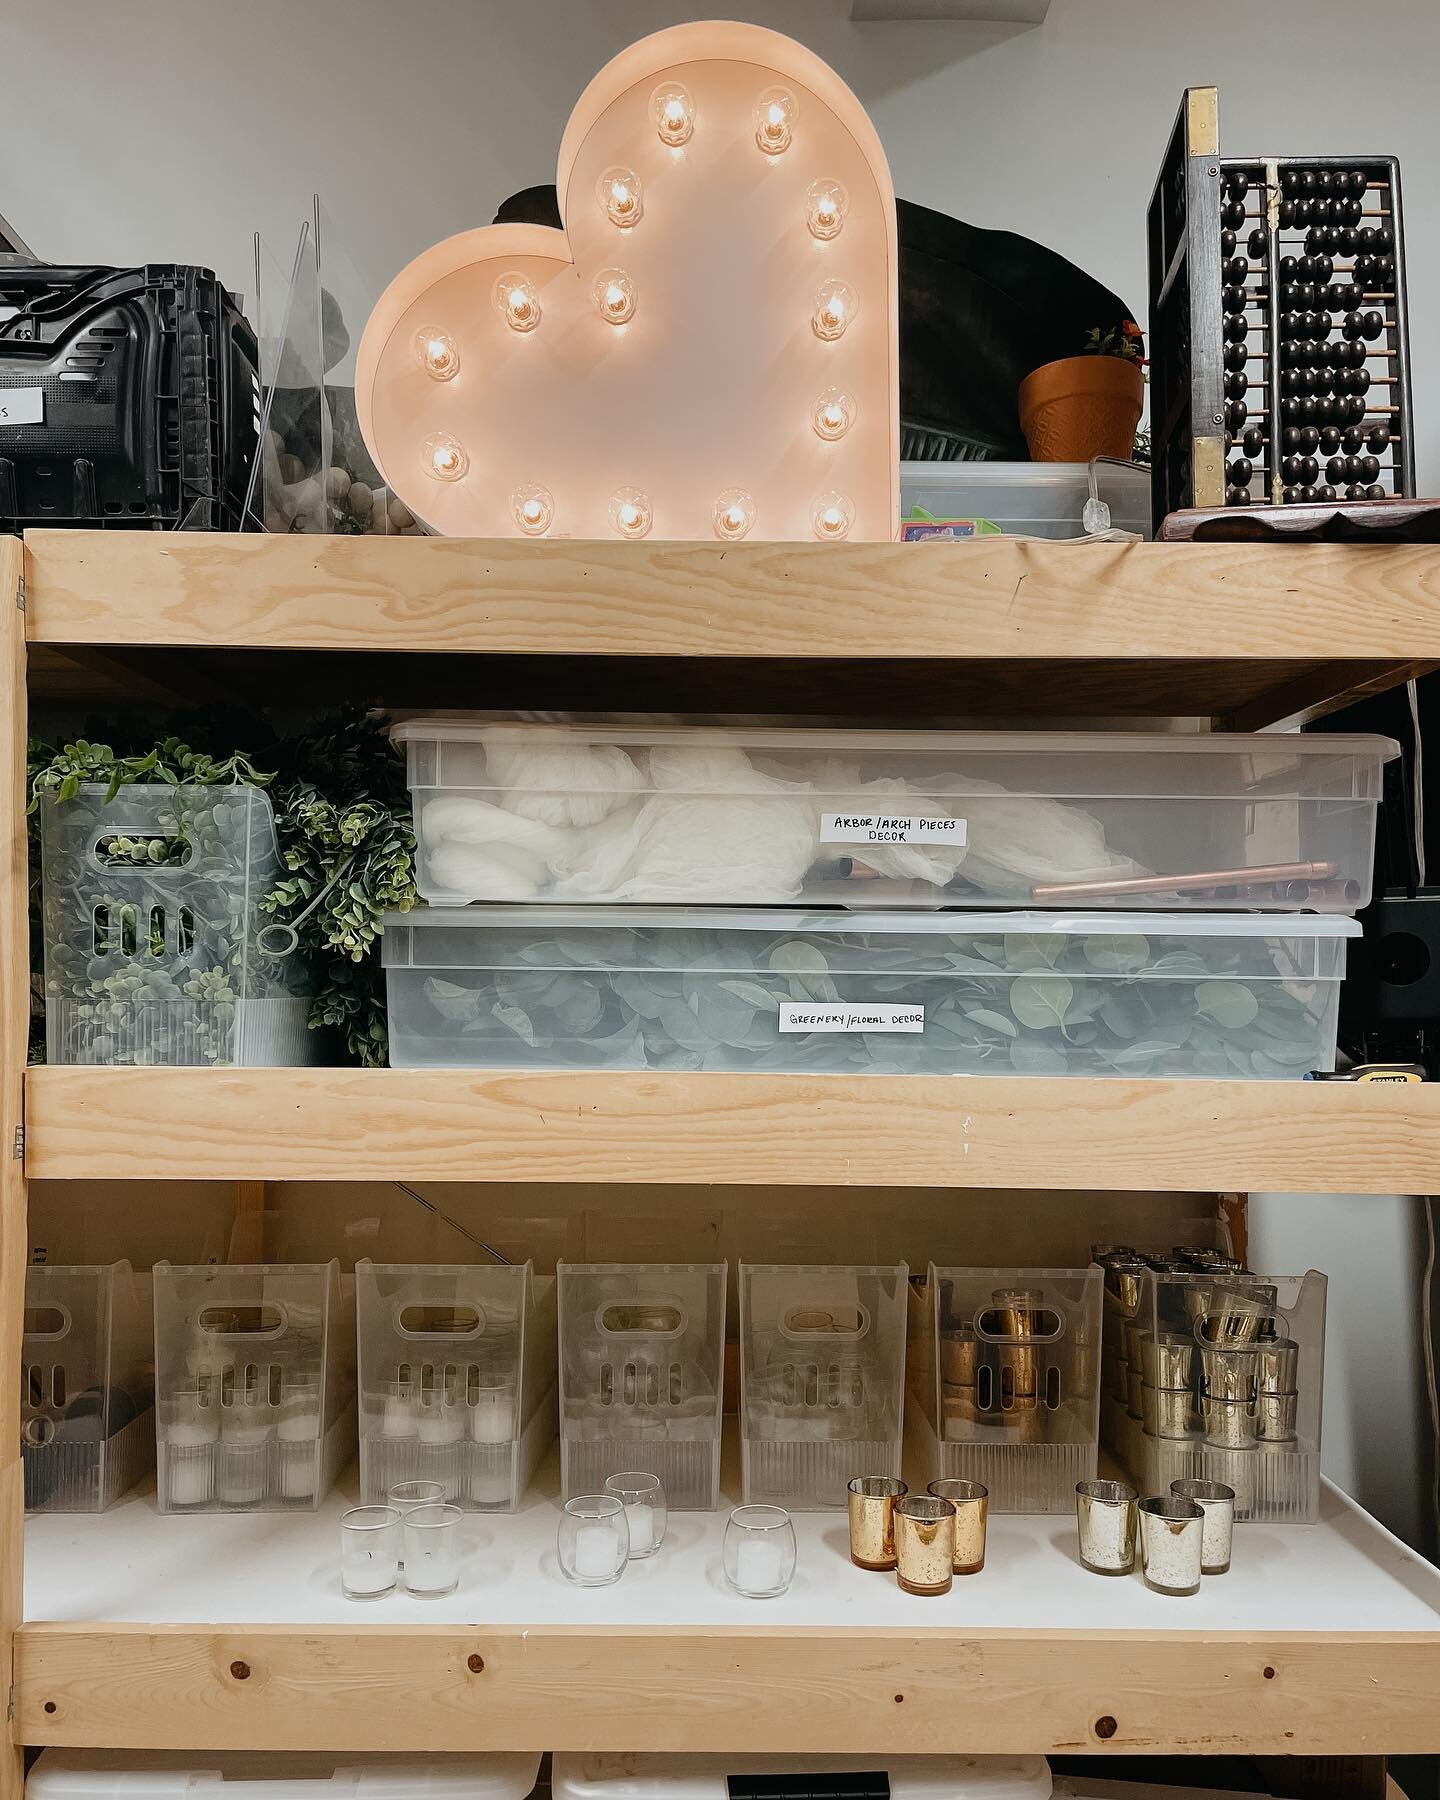 We love providing these easy grabs for our clients... Every booking comes with free access to our *growing* decor closet. Perks are the best, right?! ☺️

As we say during every tour: &ldquo;There is no need to buy tons of votives to only use for one 